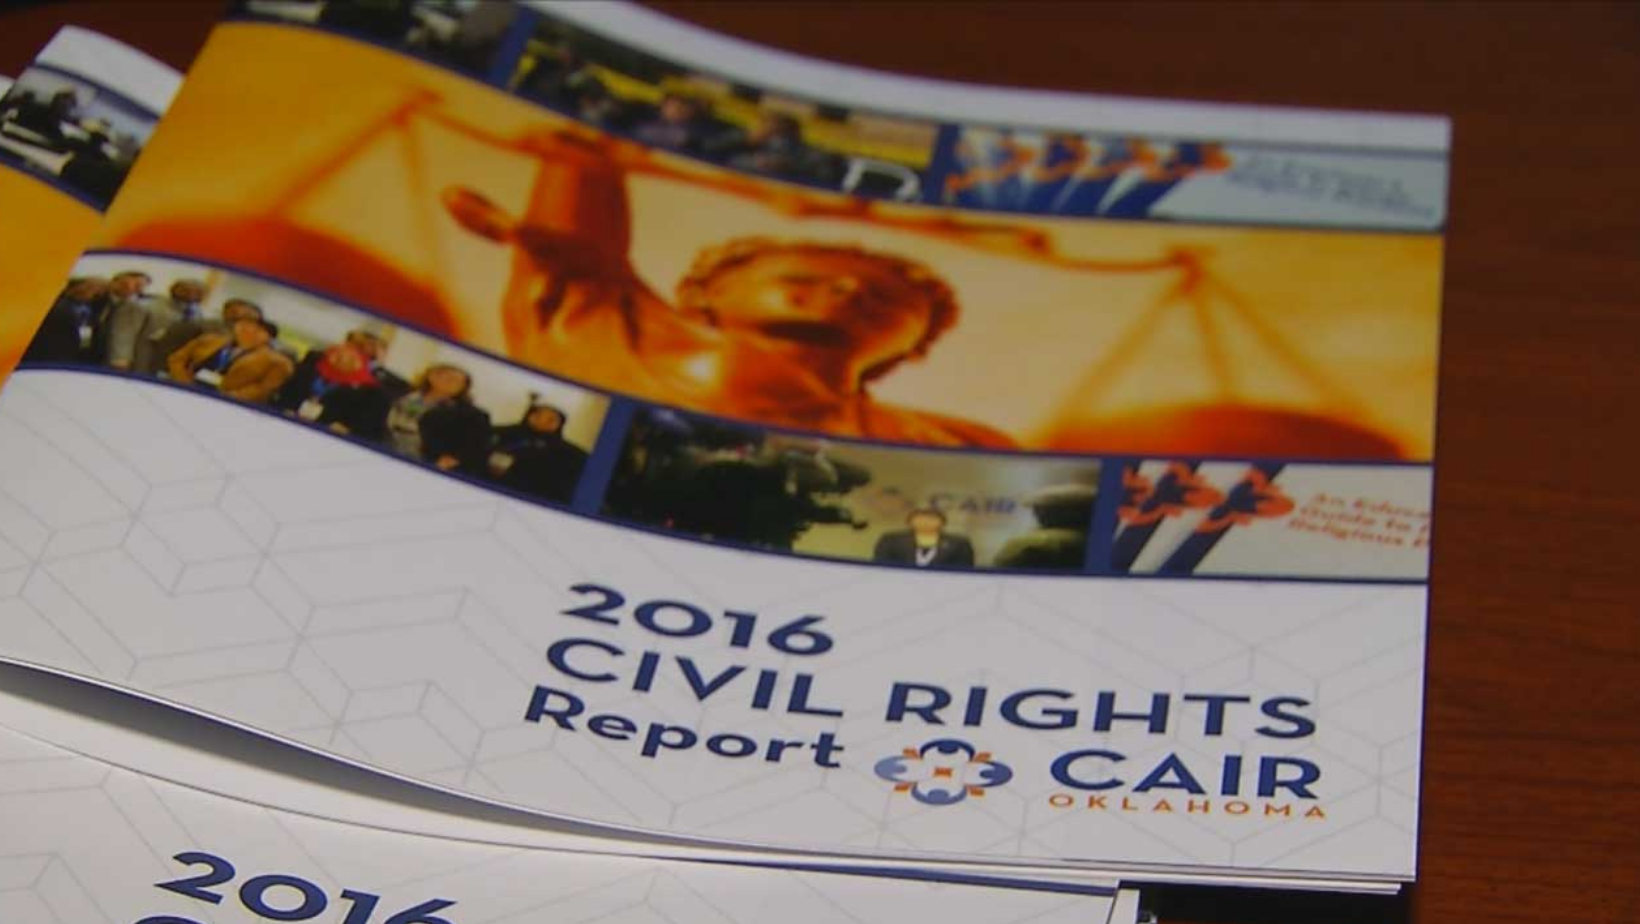 CAIR-OK Releases 2016 Civil Rights Report Showing Spike in Anti-Muslim Hate Incidents